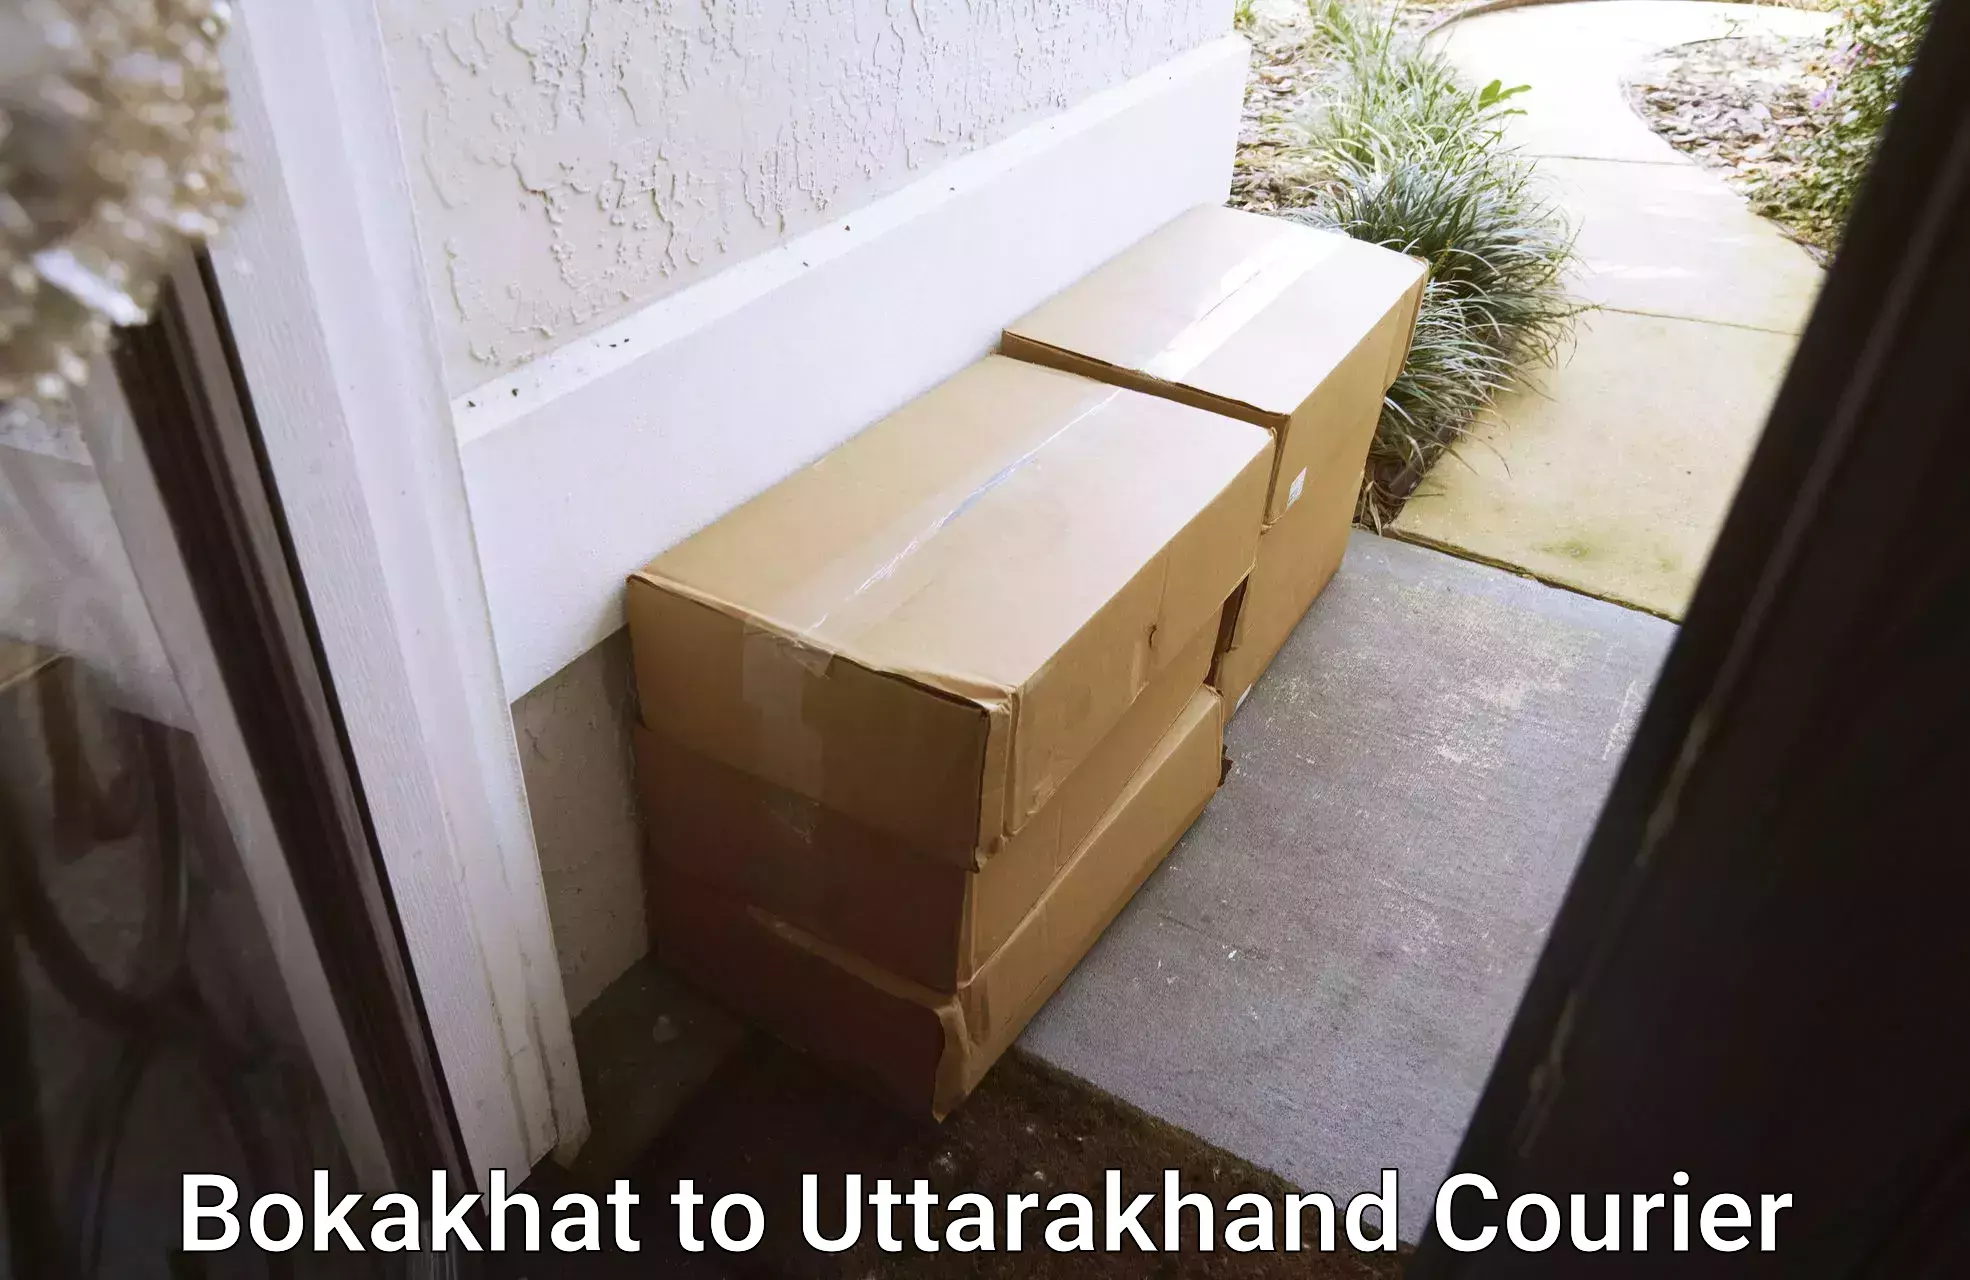 Courier service booking Bokakhat to Tanakpur